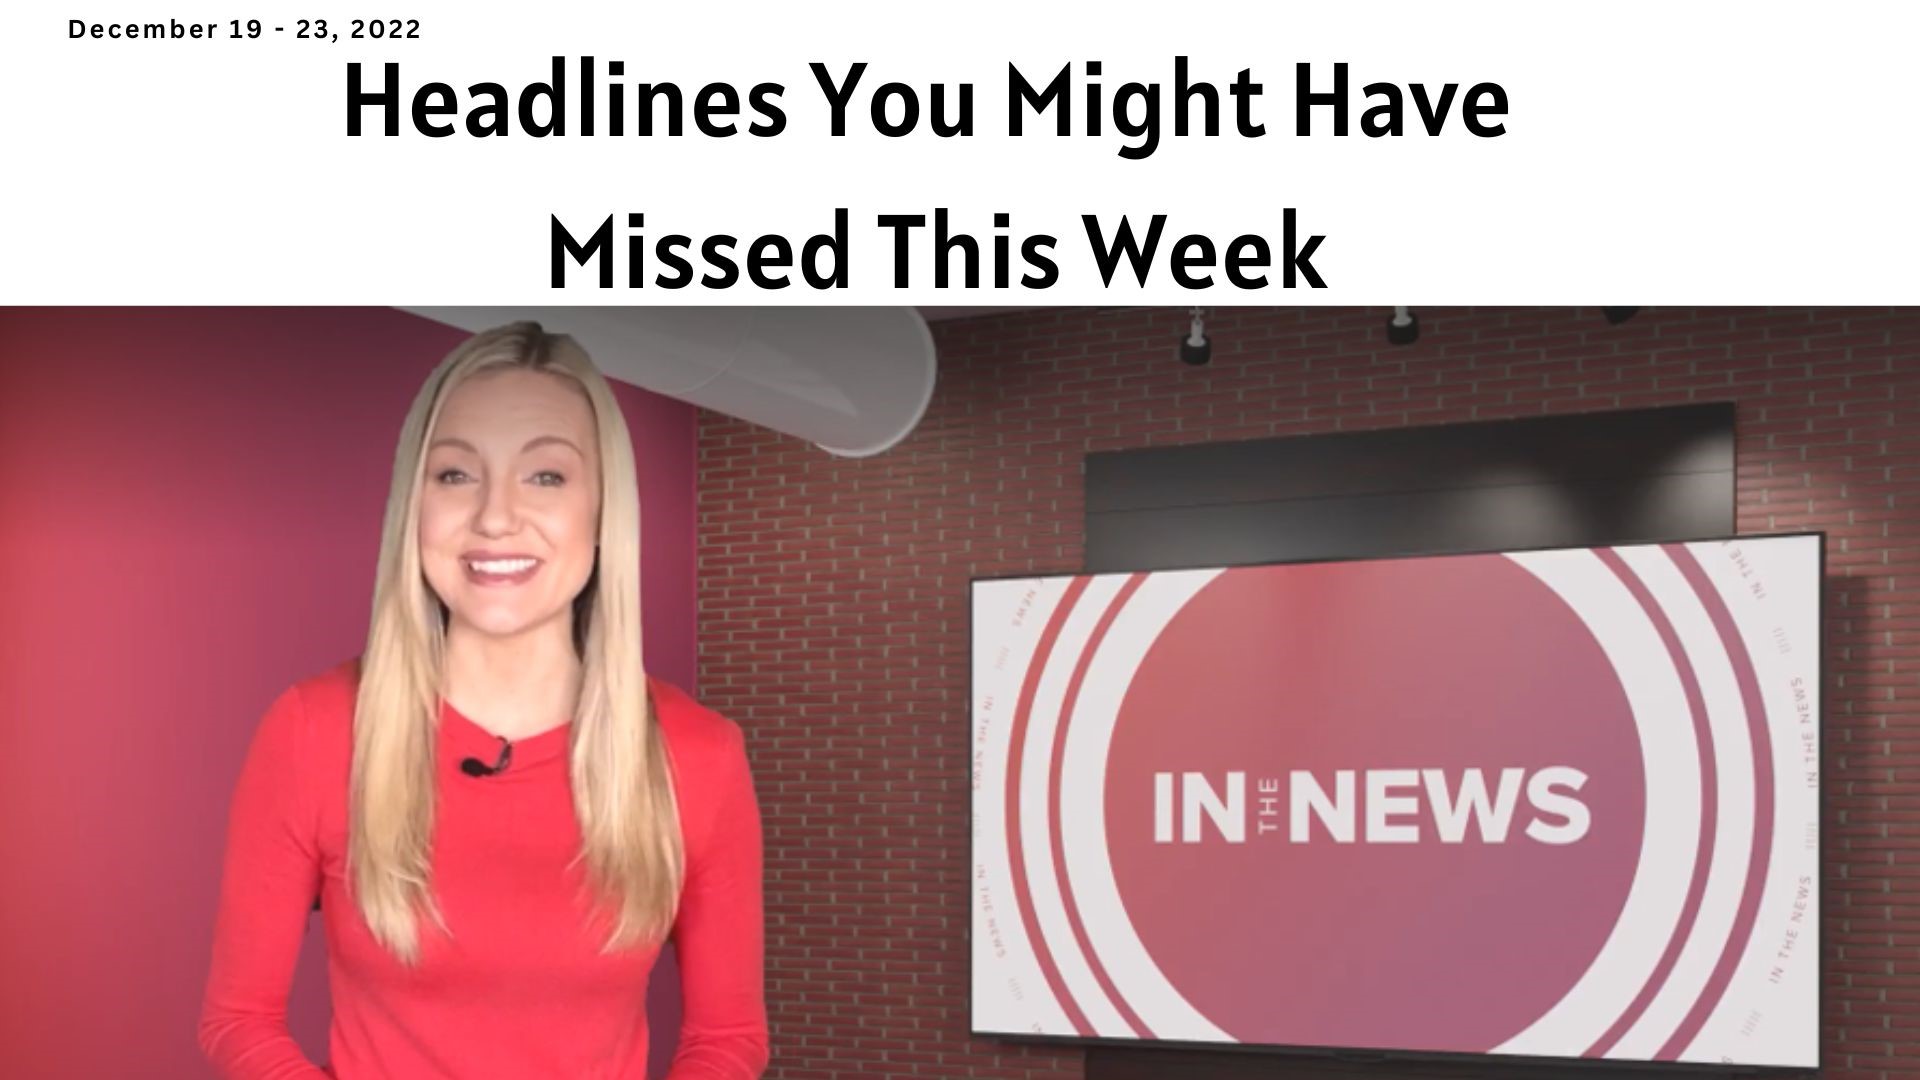 A look at some of the week's big headlines you might have missed from a massive winter storm and holiday travel to a wartime trip.